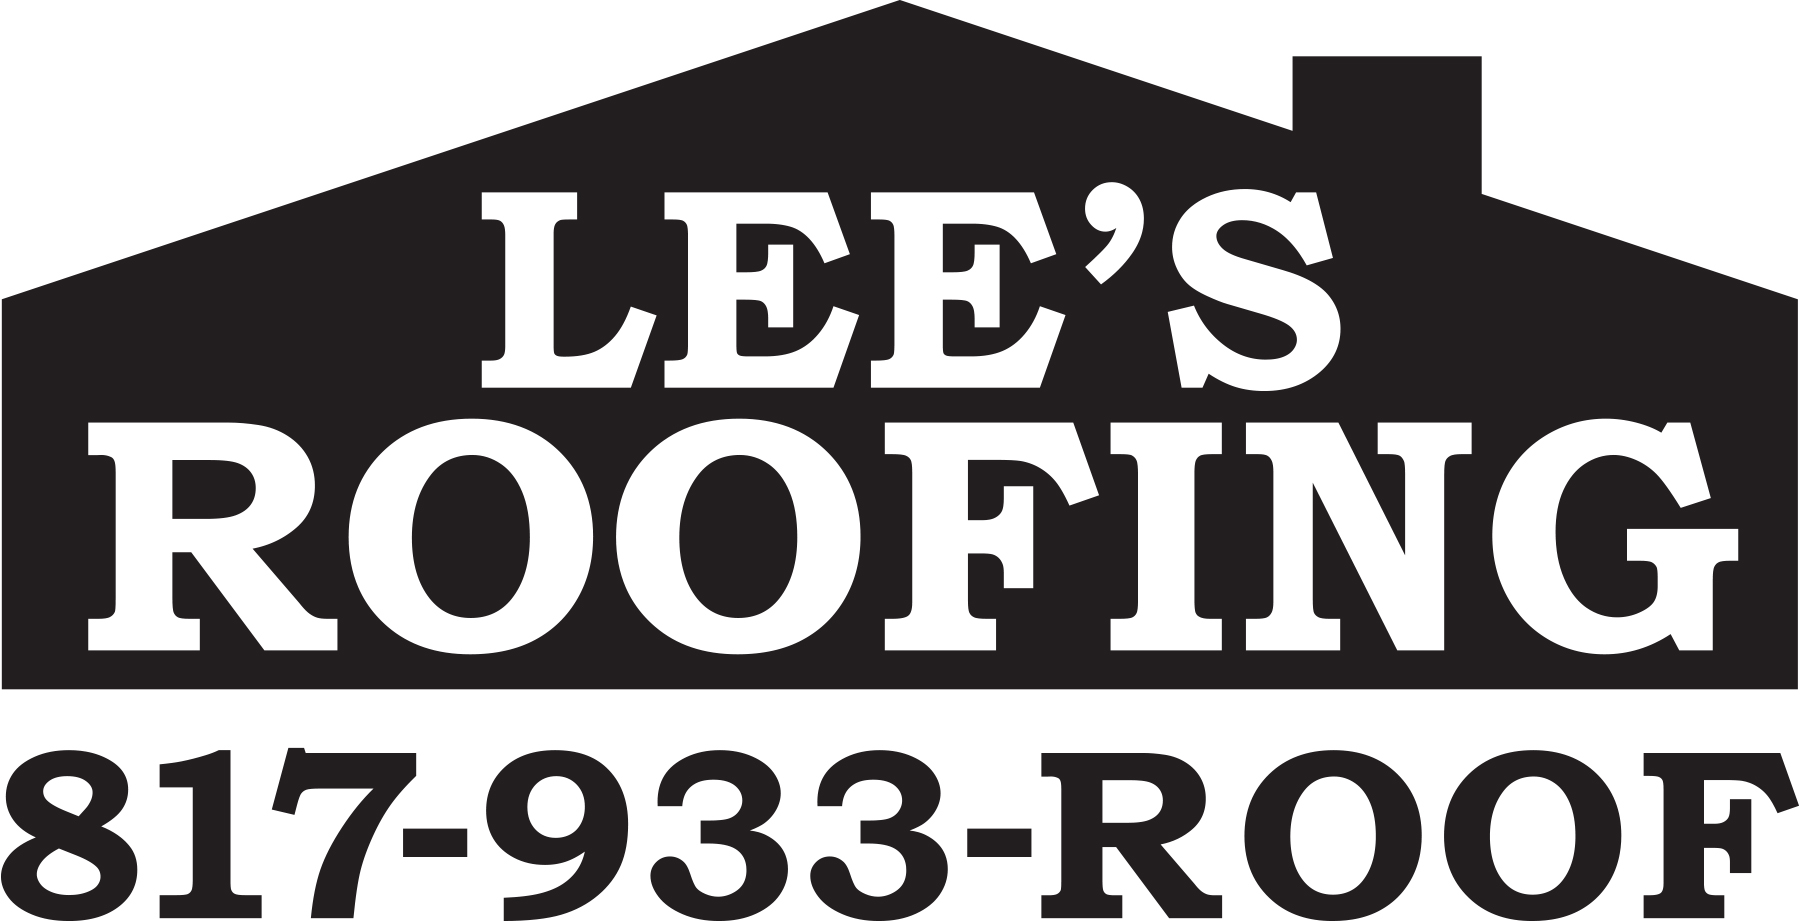 Lee's Roofing & Construction Logo